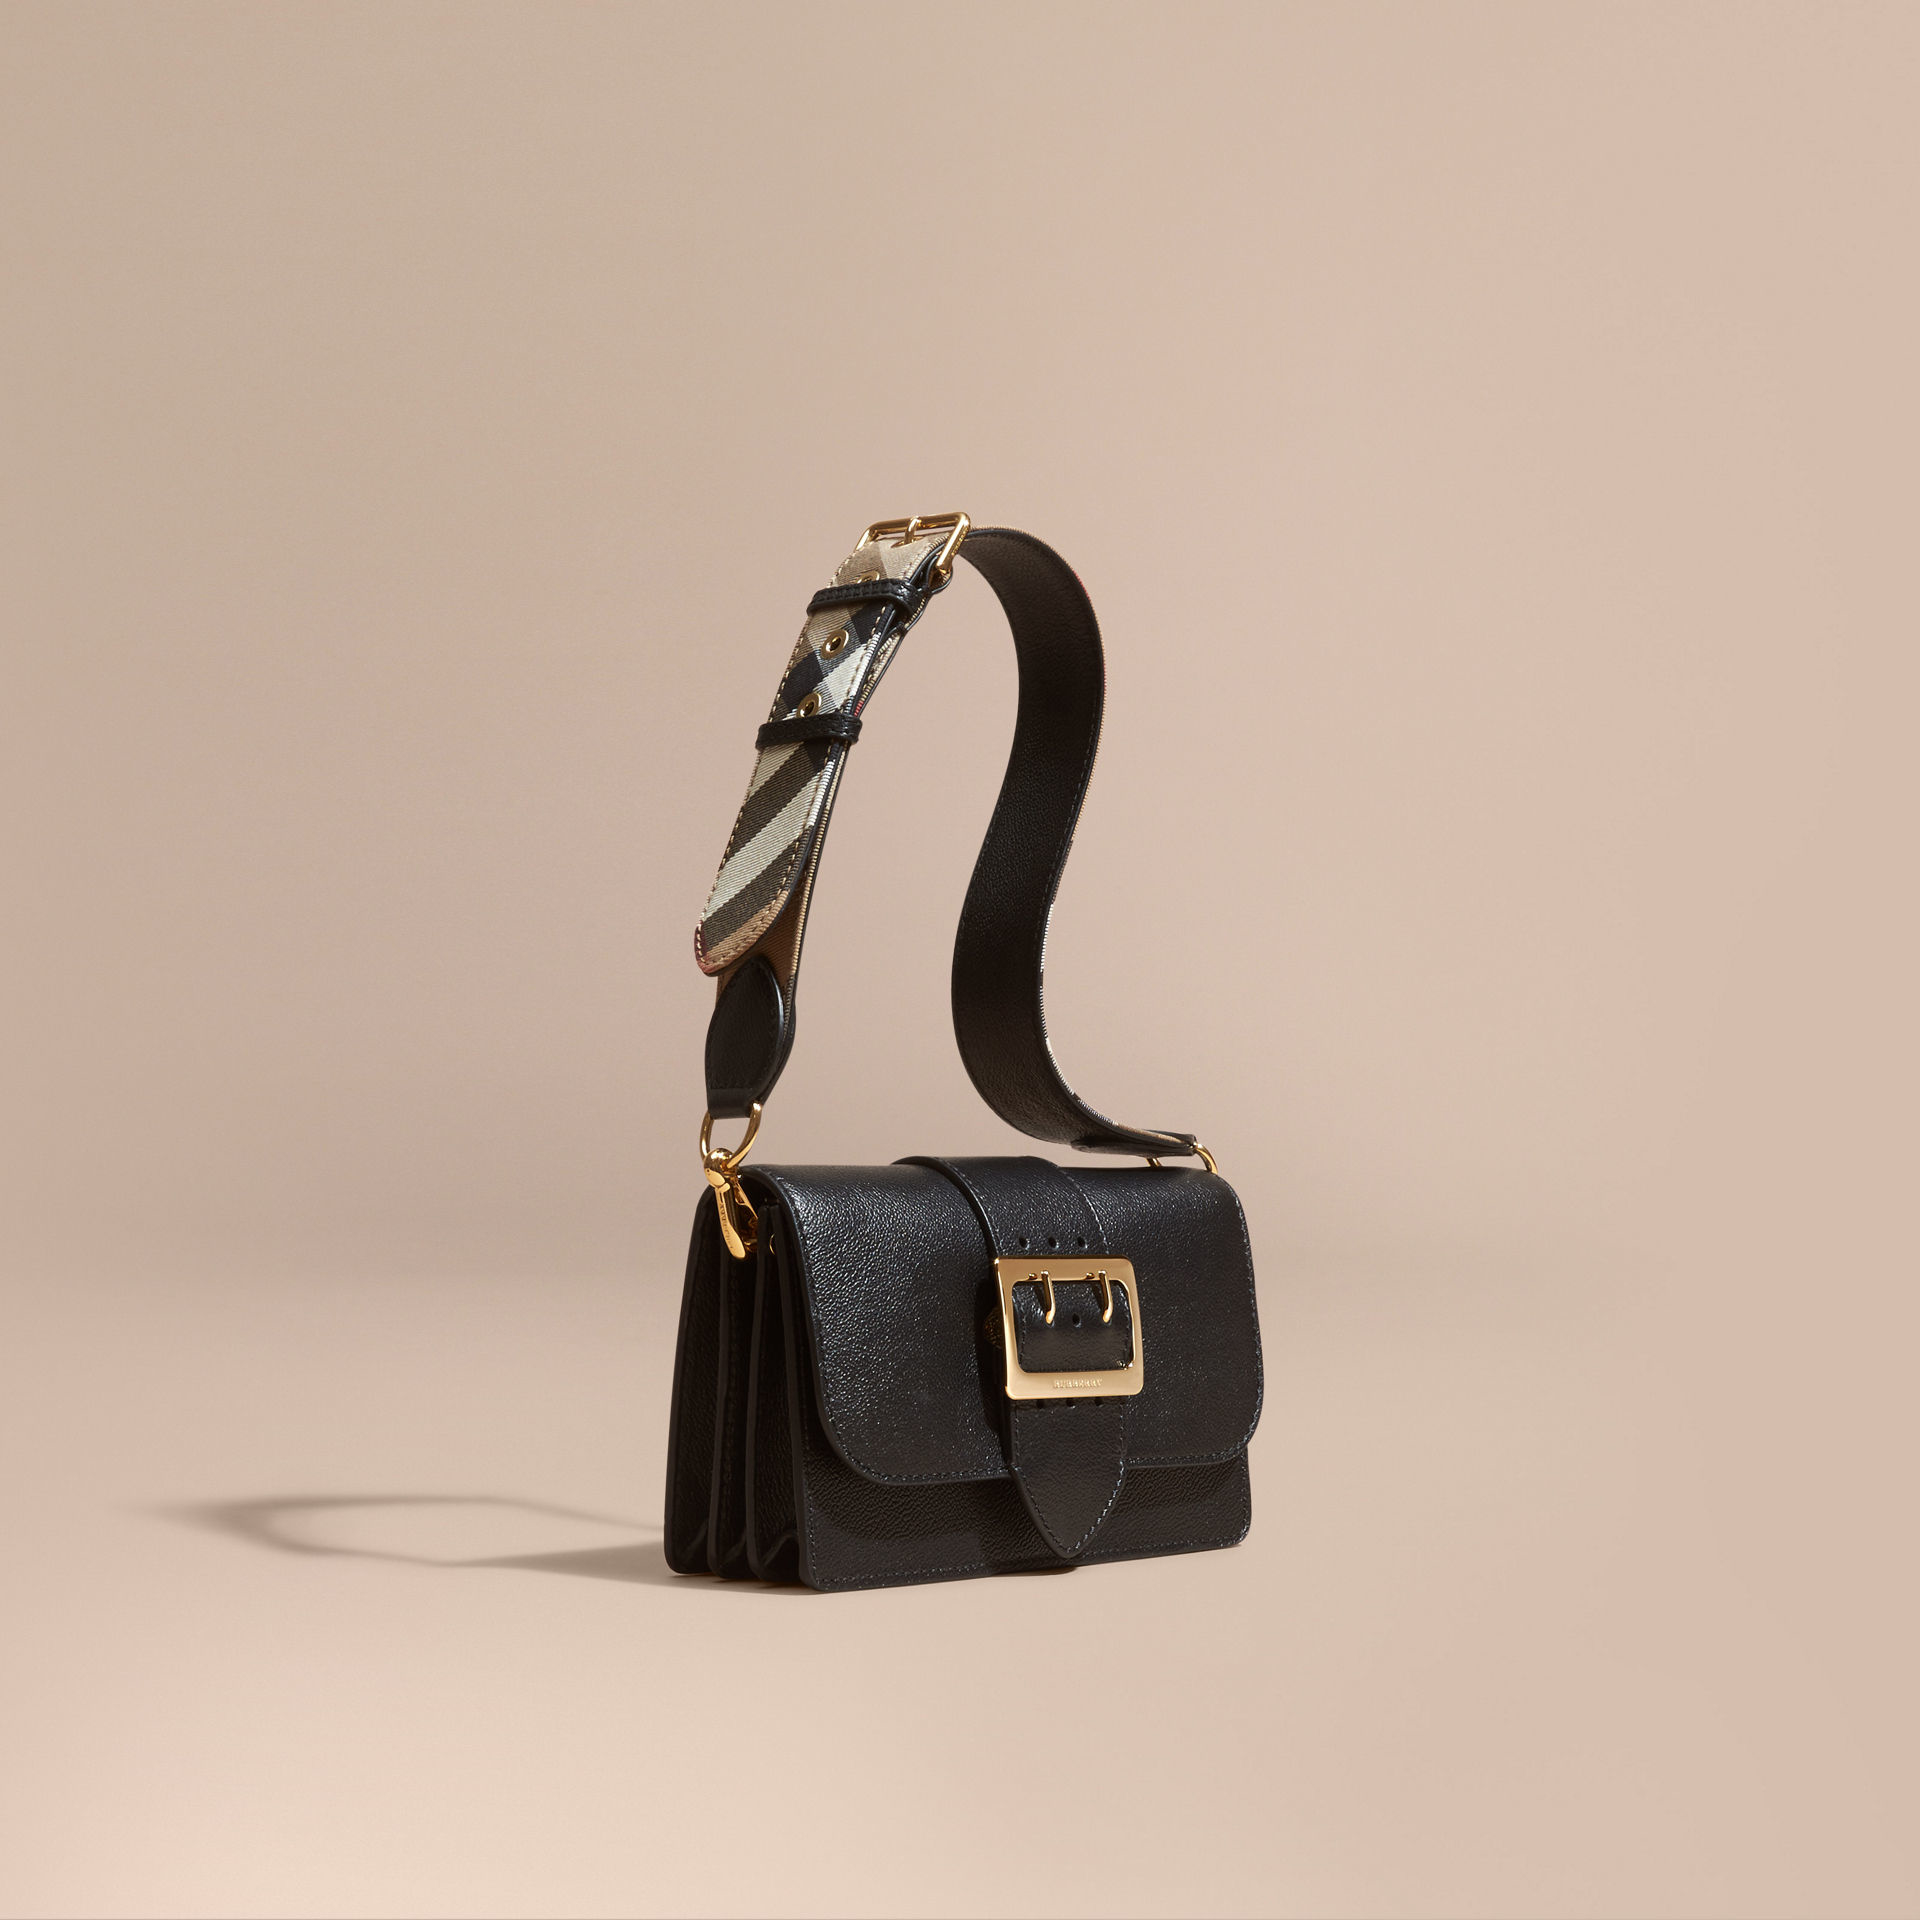 Burberry The Small Leather Buckle Bag in Black - Lyst